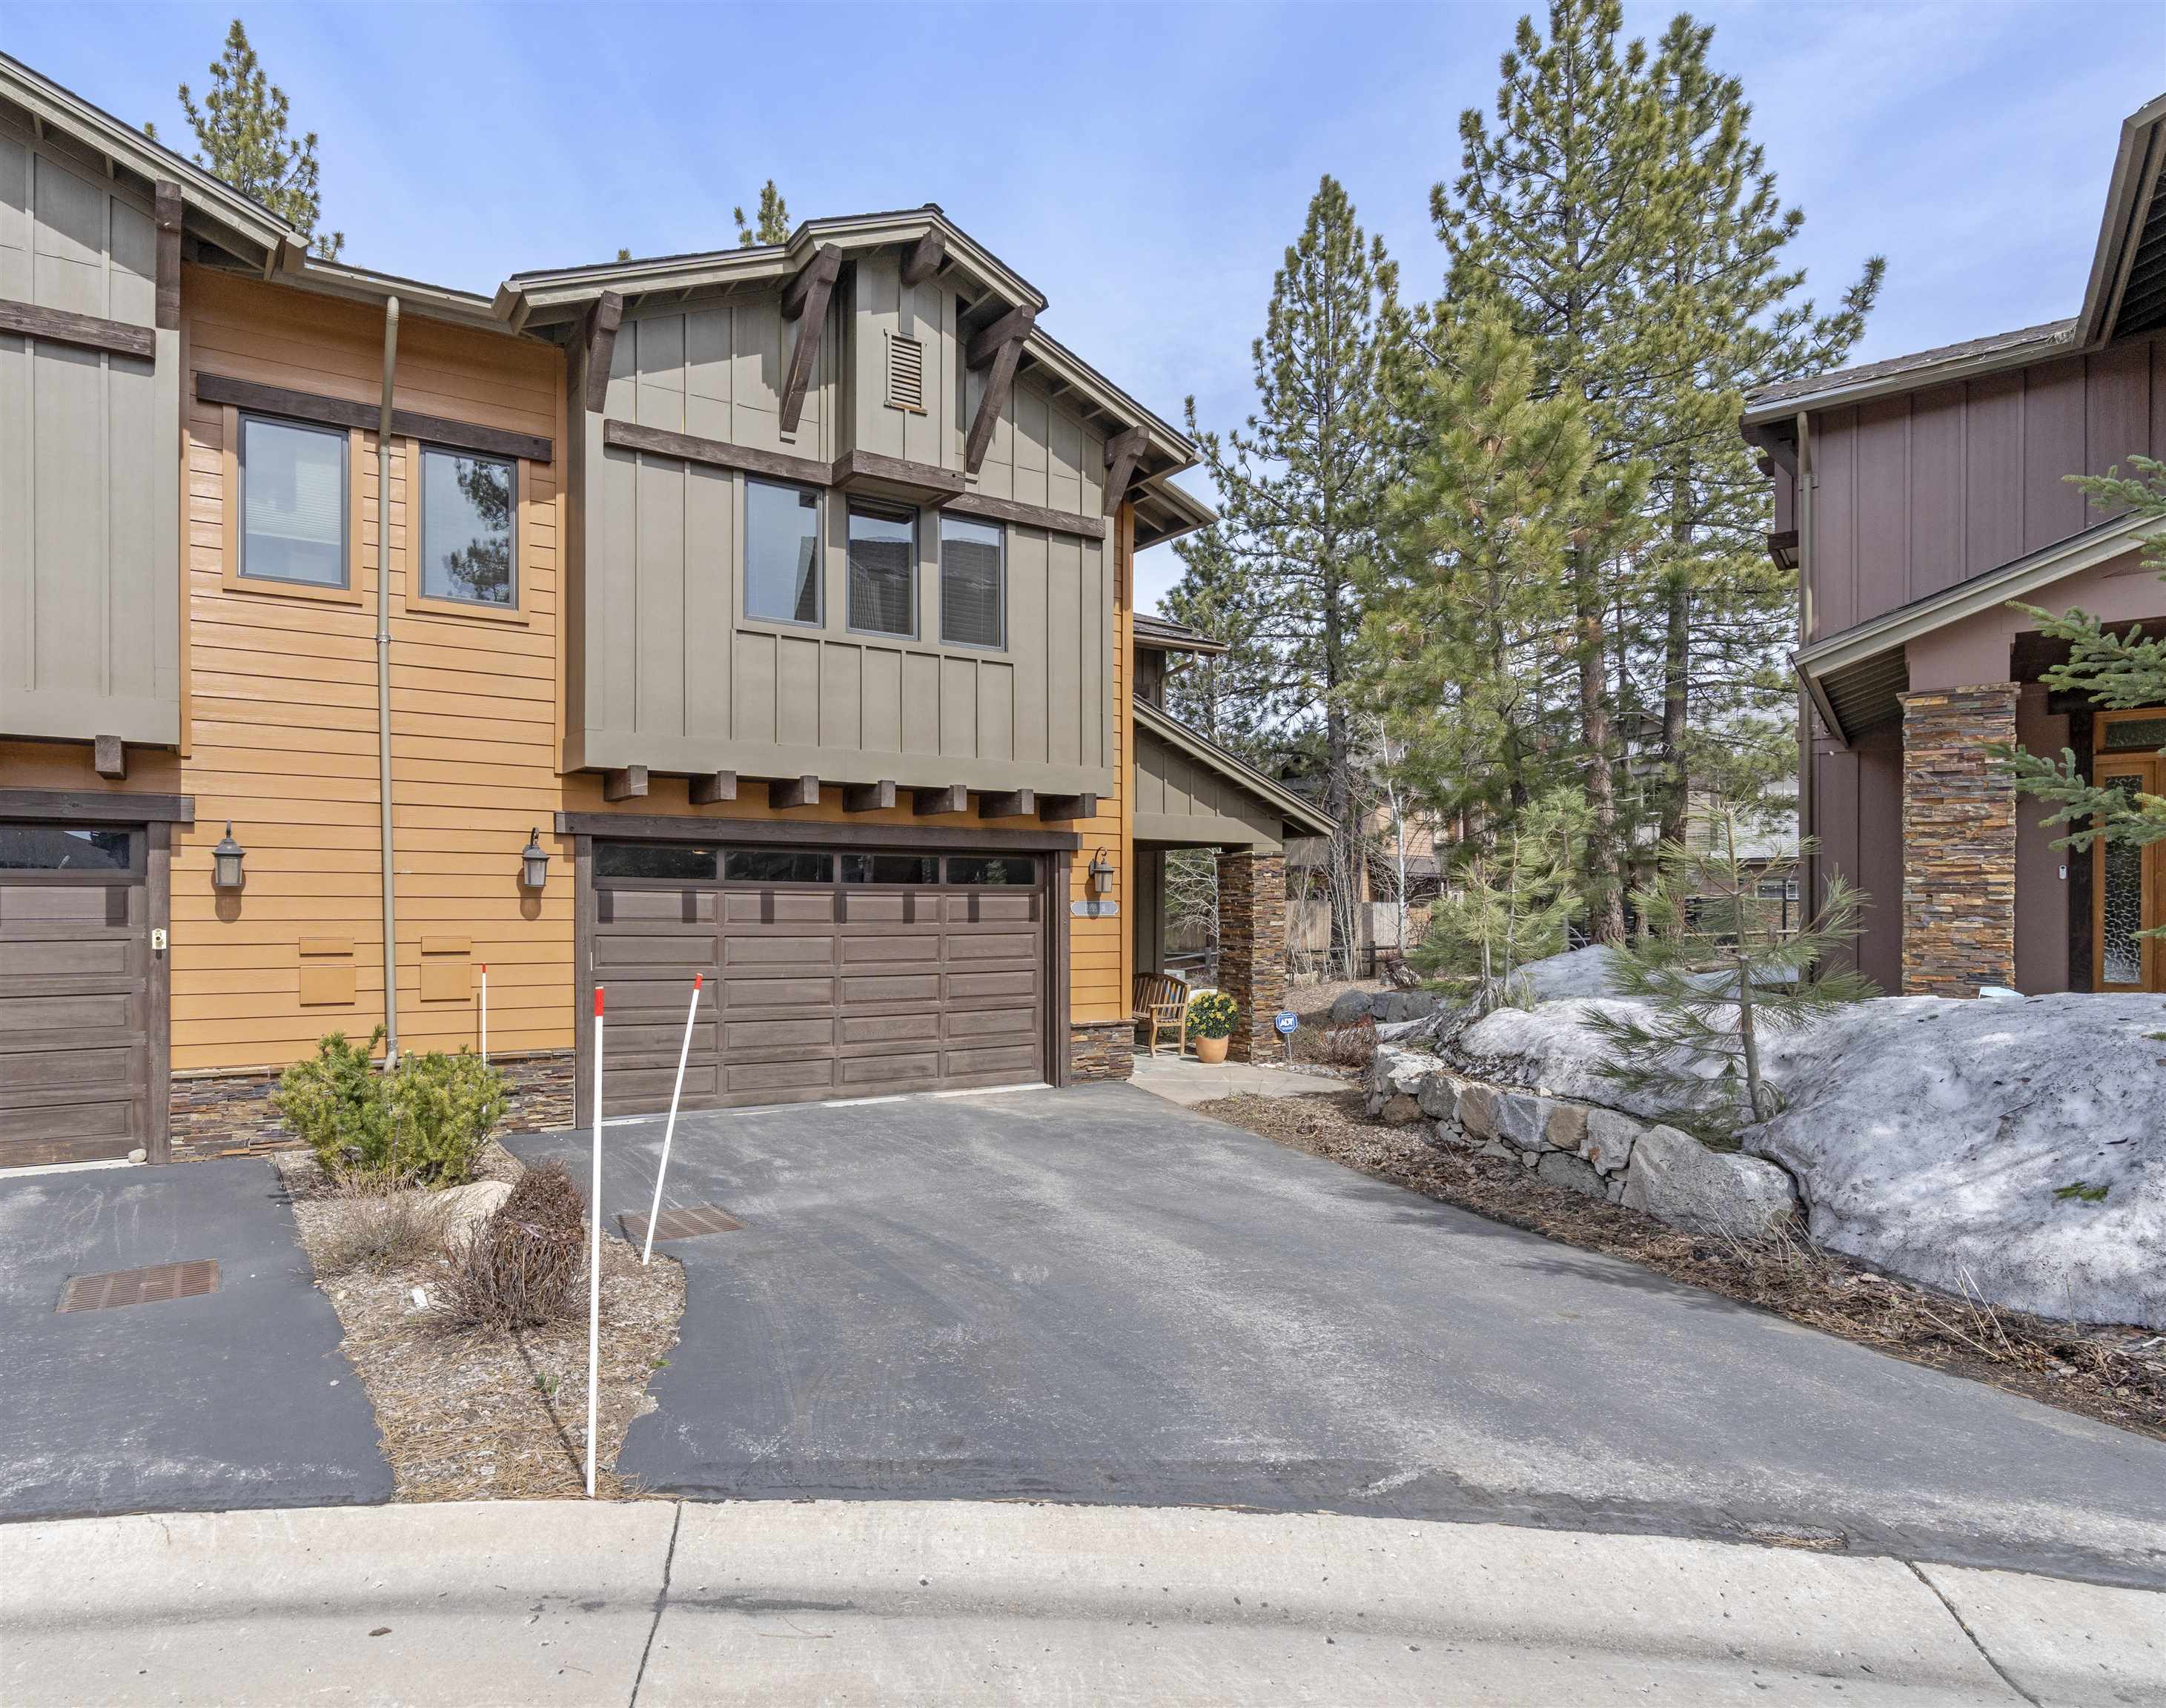 11898 Hope Court Unit B, Truckee, California, 96161, United States, 3 Bedrooms Bedrooms, ,2 BathroomsBathrooms,Residential,For Sale,11898 Hope Court Unit B,1506632